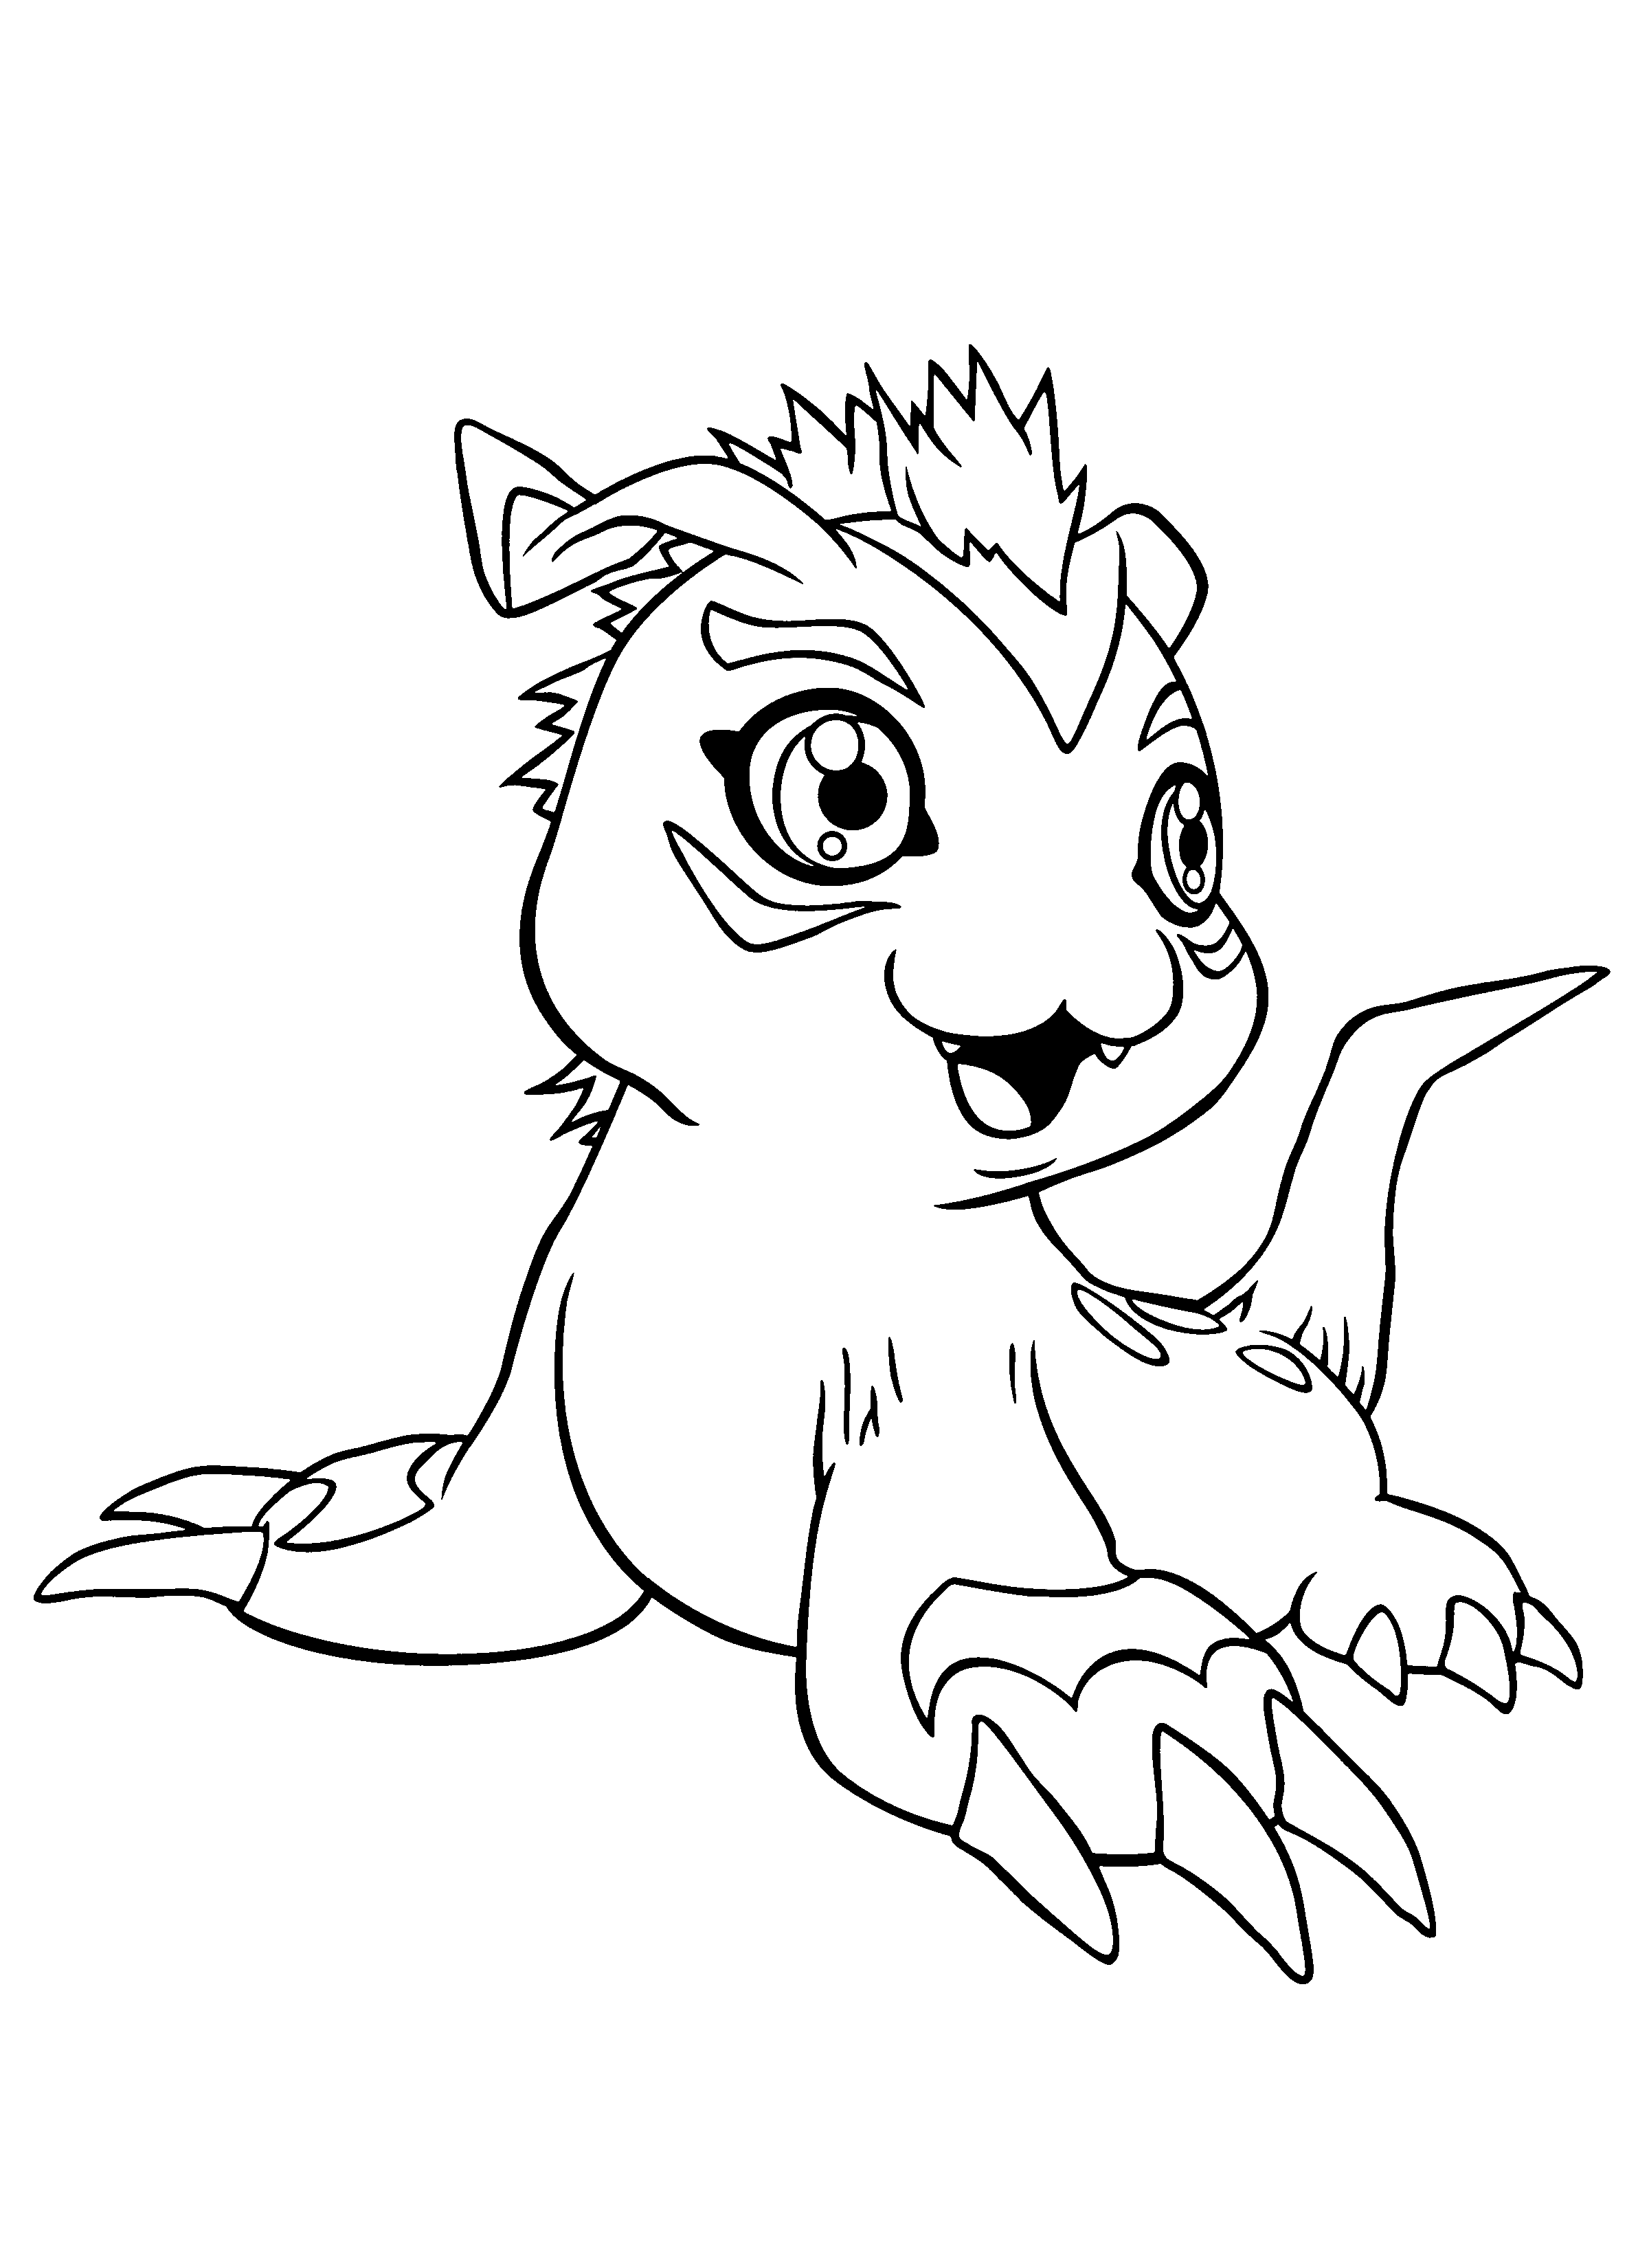 1000 images about Coloring pages on Pinterest Pokemon